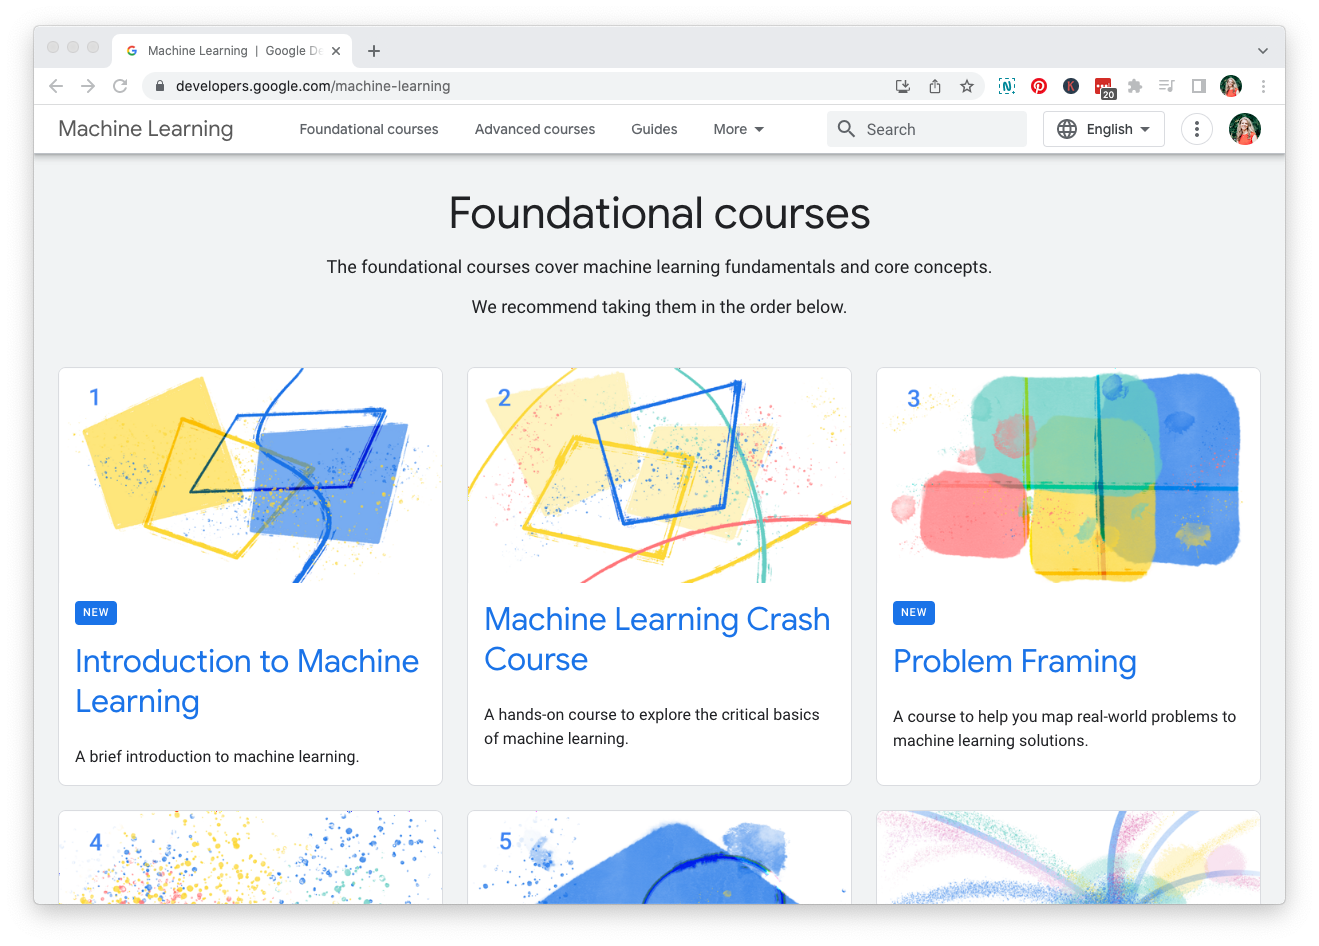 A view of the foundational courses in Machine Learning offered by Google